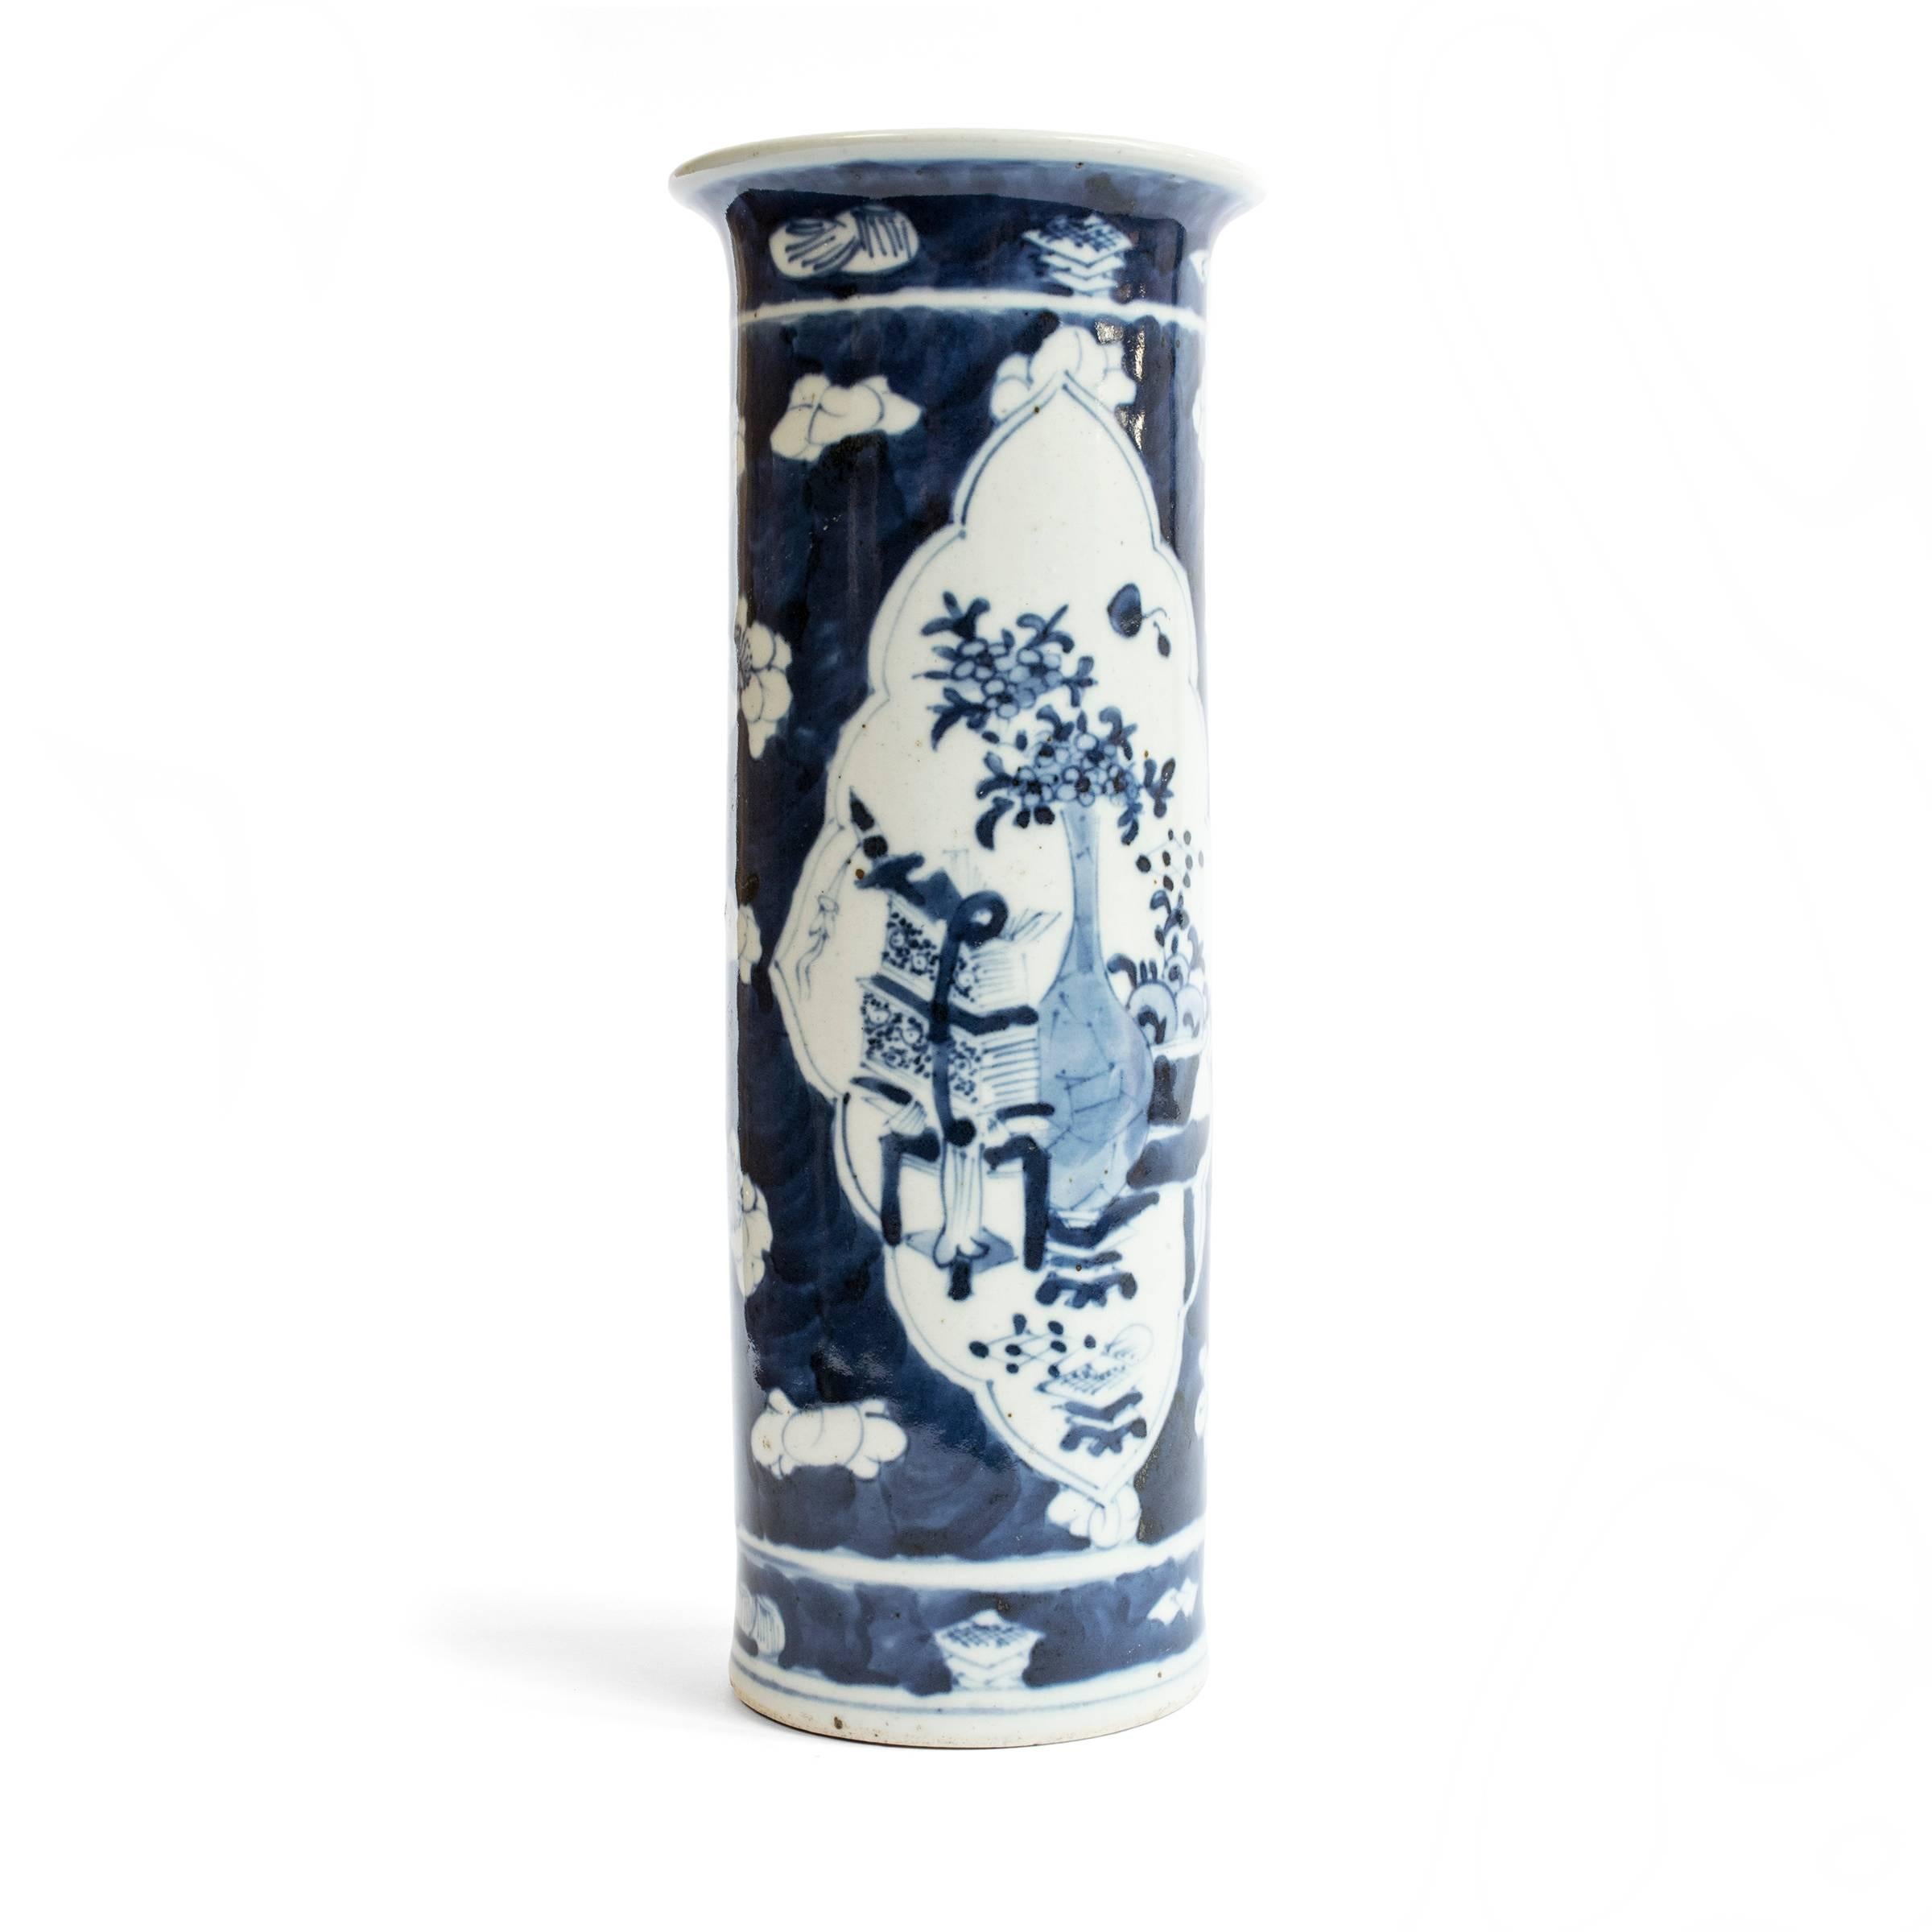 Chinese blue-and-white porcelain has inspired ceramists worldwide since cobalt was first introduced to China from the Middle East thousands of years ago. Made in the early 20th century this tall vase provides a seamless surface for decoration. Bold